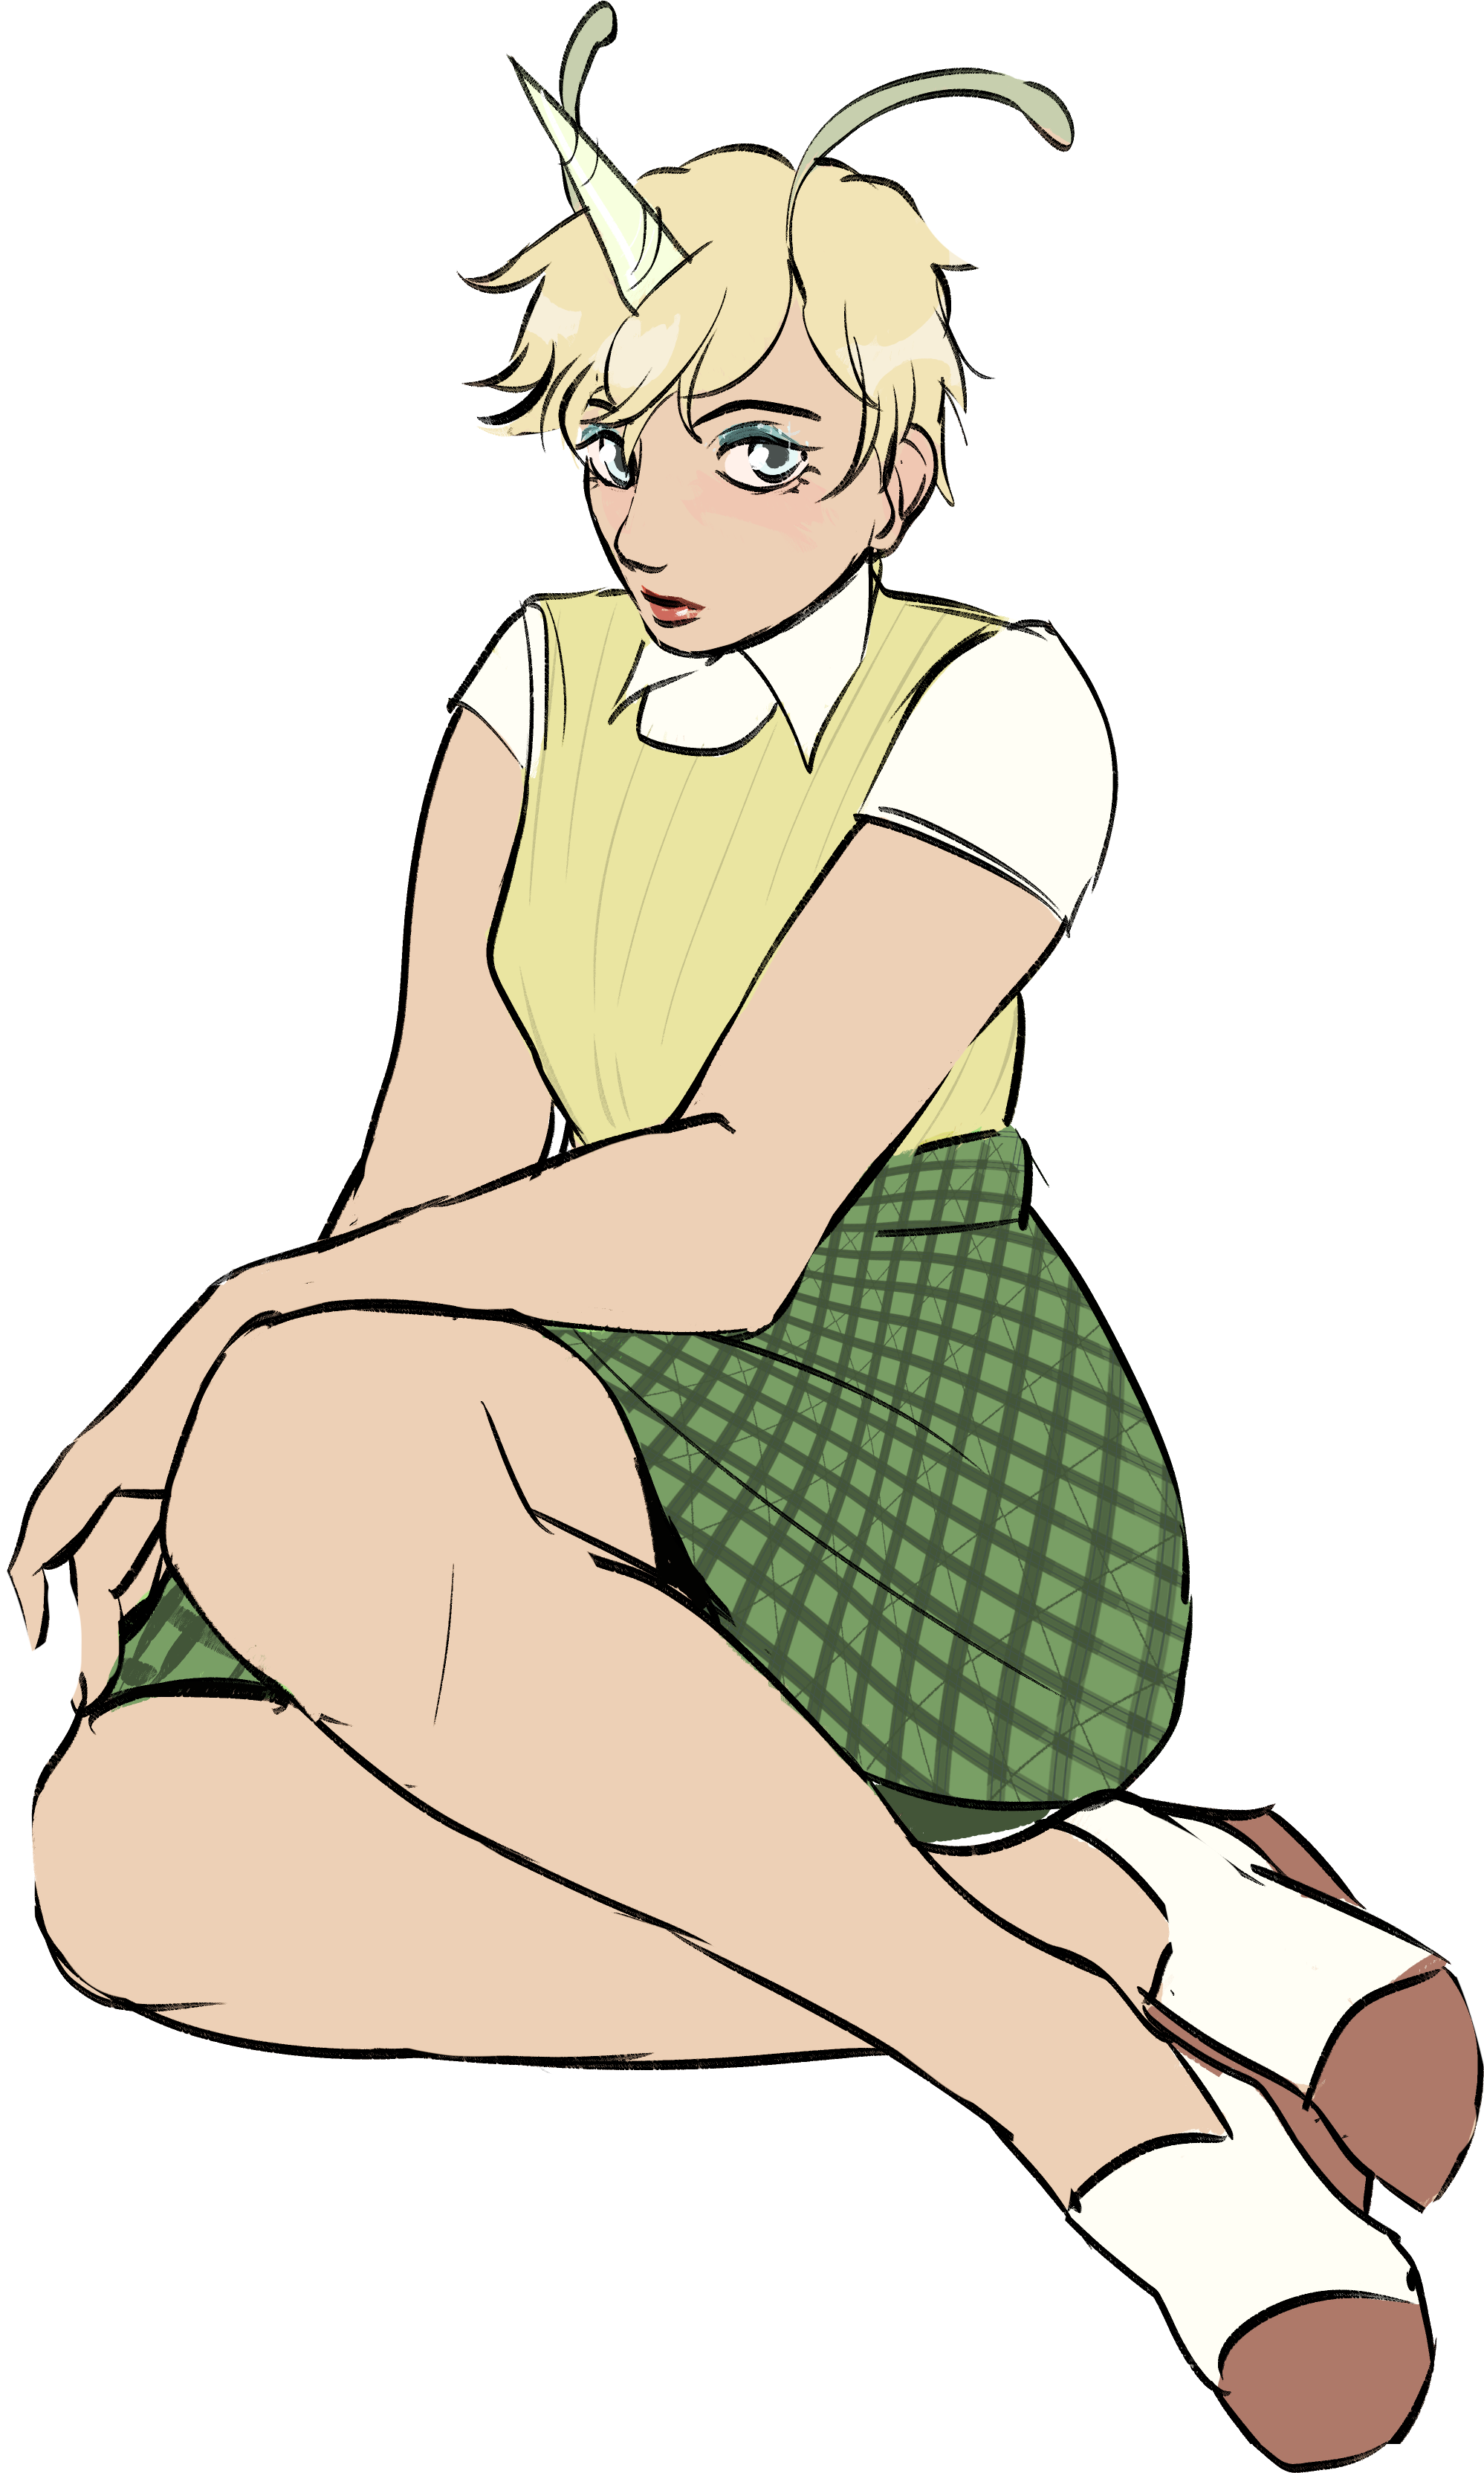 teresa with beautiful anime eyes in a green checkerboard skirt, white short sleeve shirt with collar, and pale yellow vest, as she lies demurely on the ground